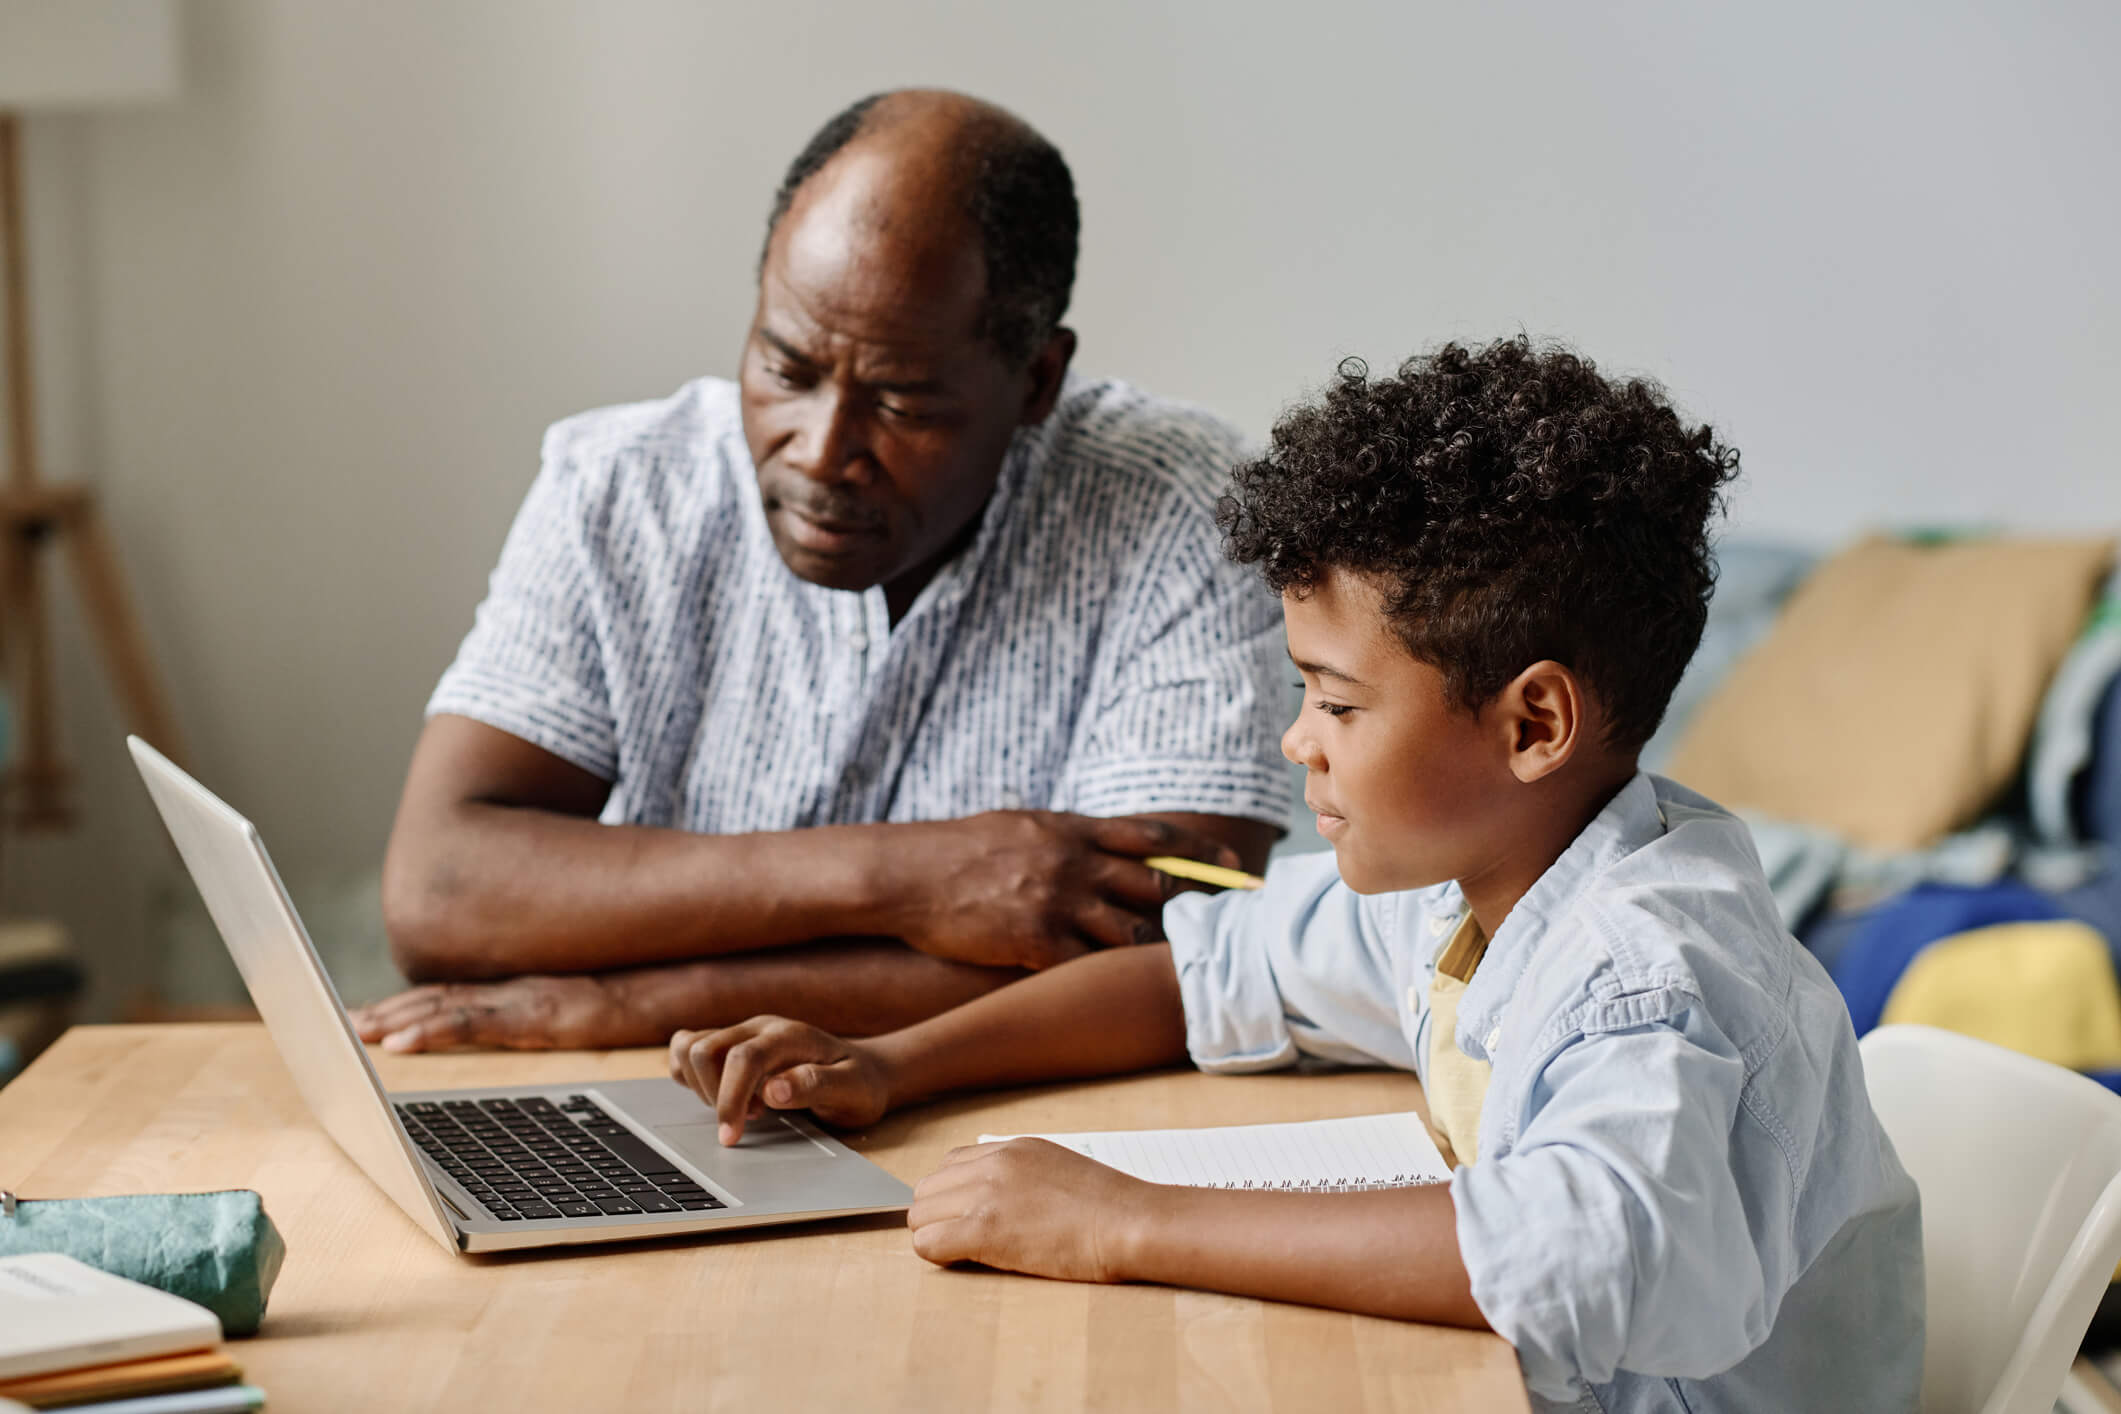 A dad and his son are sitting at a desk doing homework; the son is using a laptop, while dad supervises.